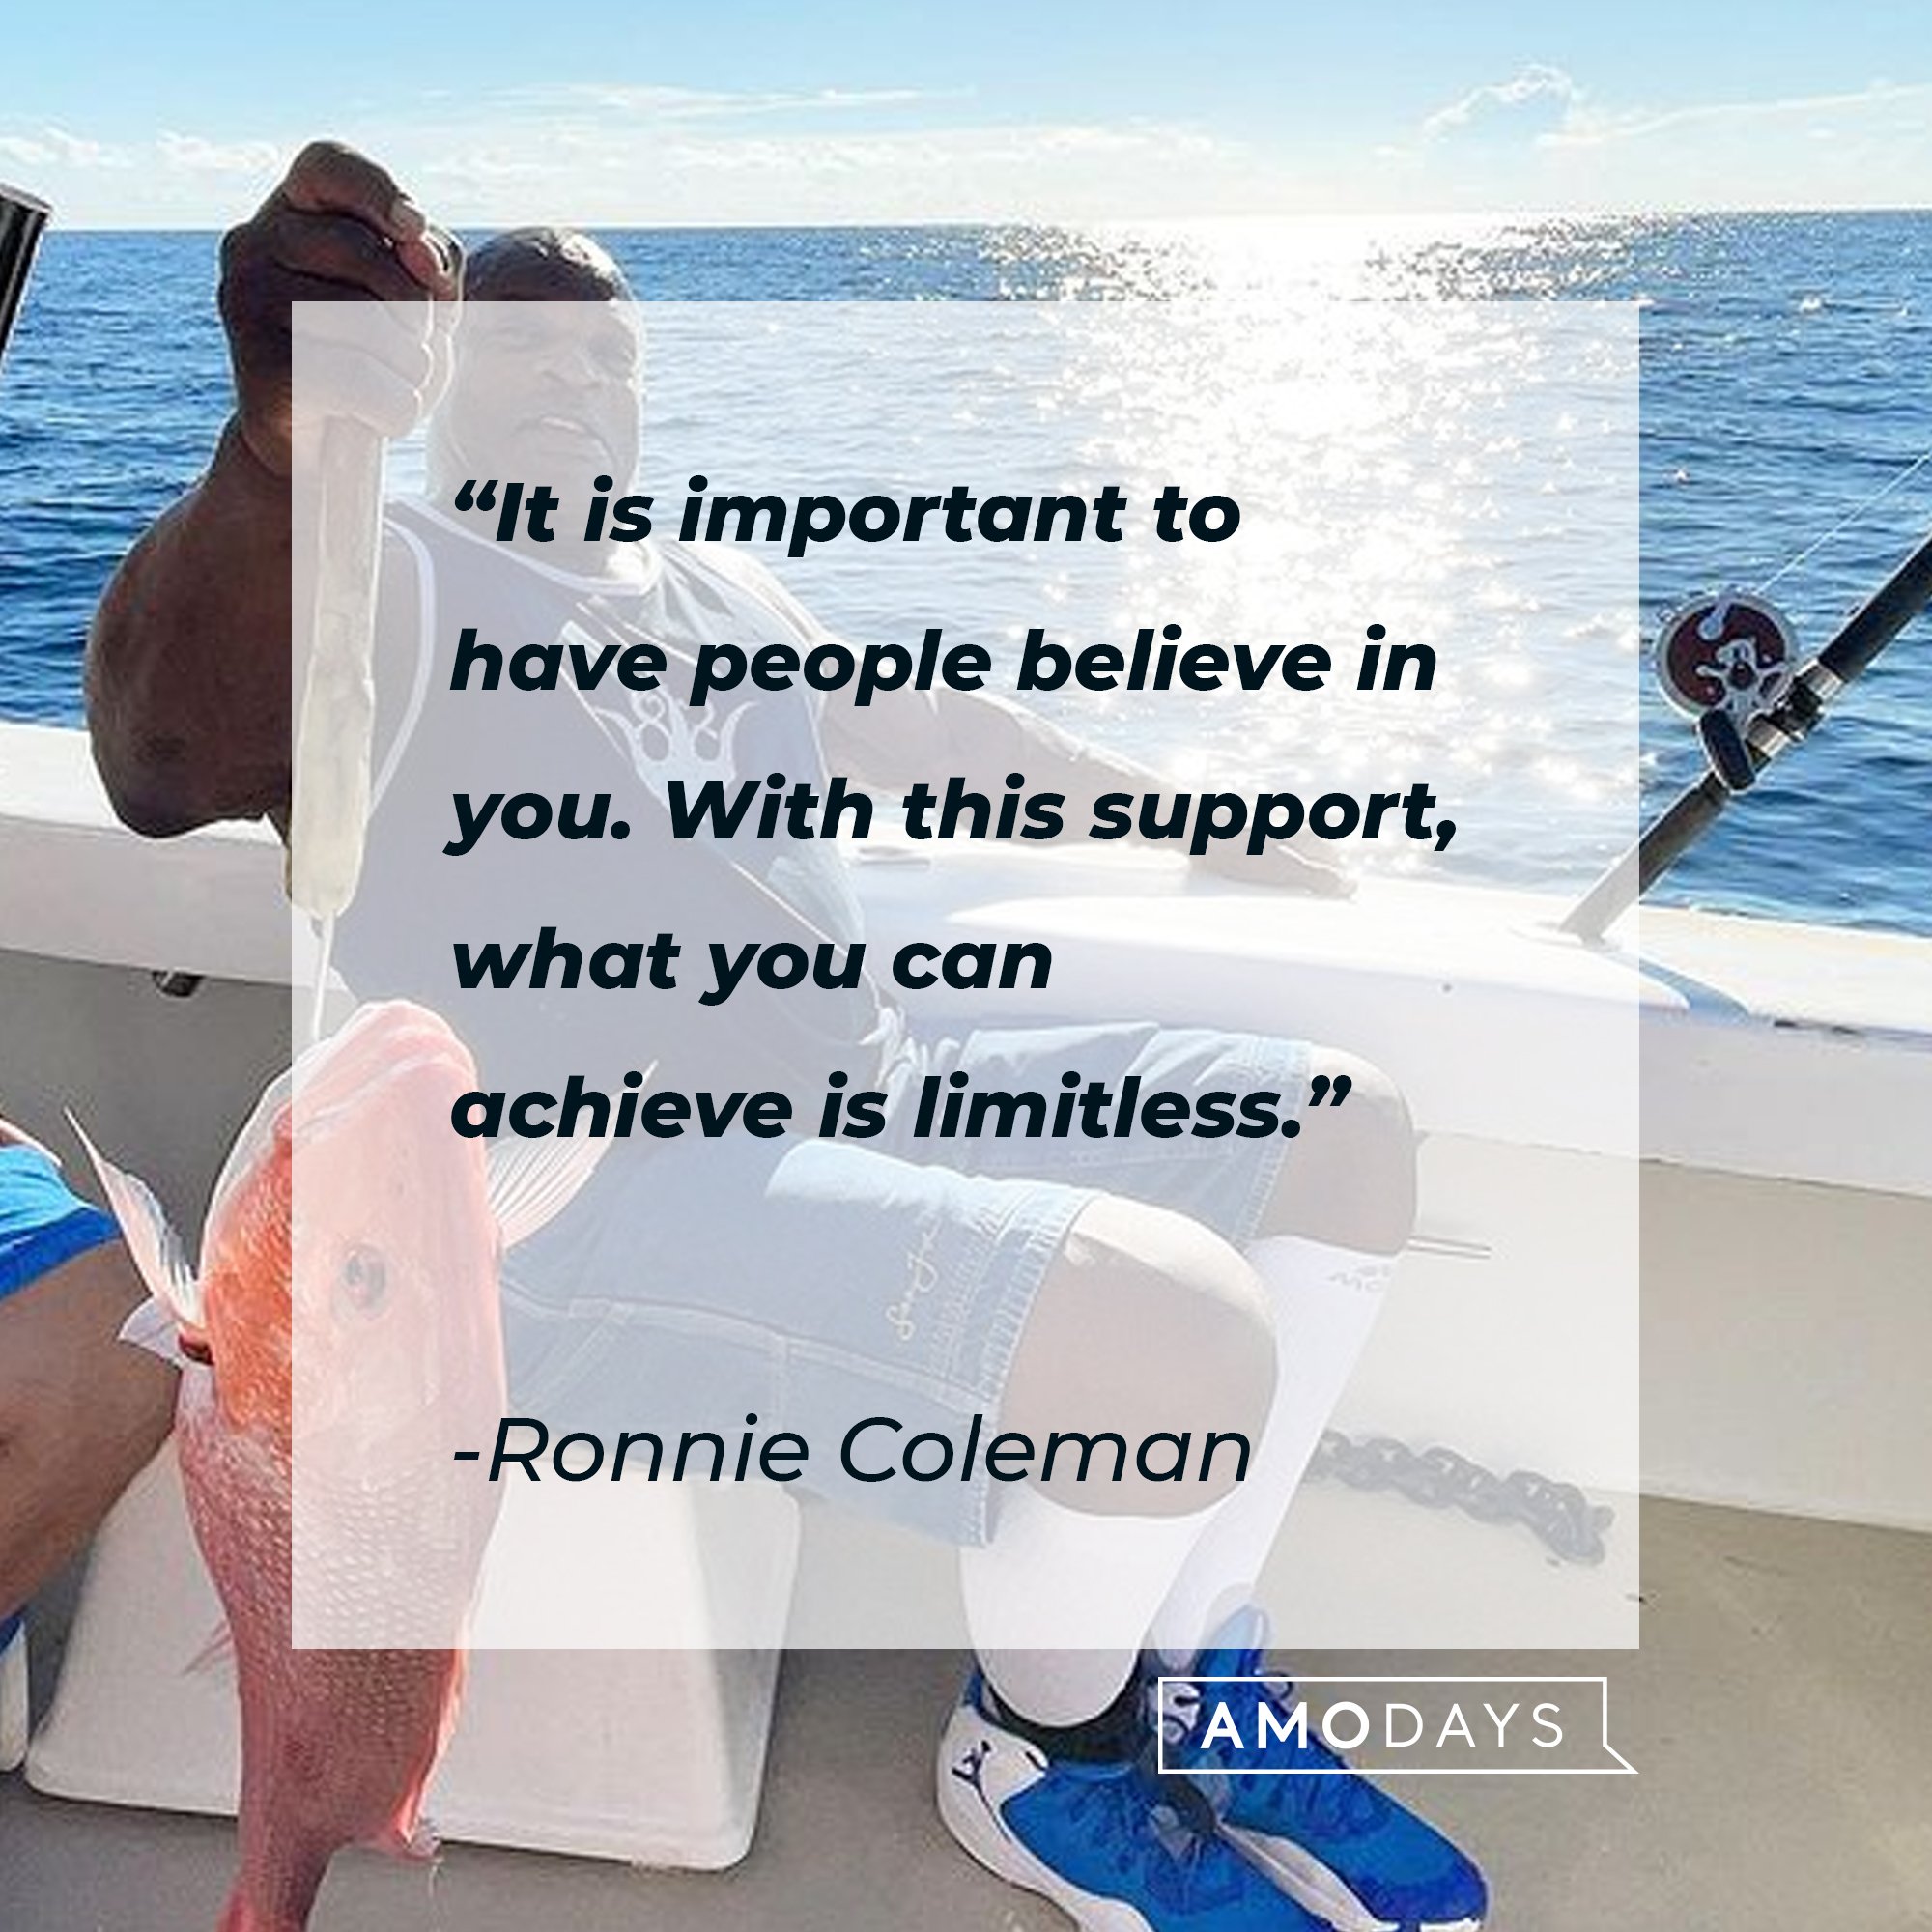 Ronnie Coleman’s quote: “It is important to have people believe in you. With this support, what you can achieve is limitless.” | Image: AmoDays